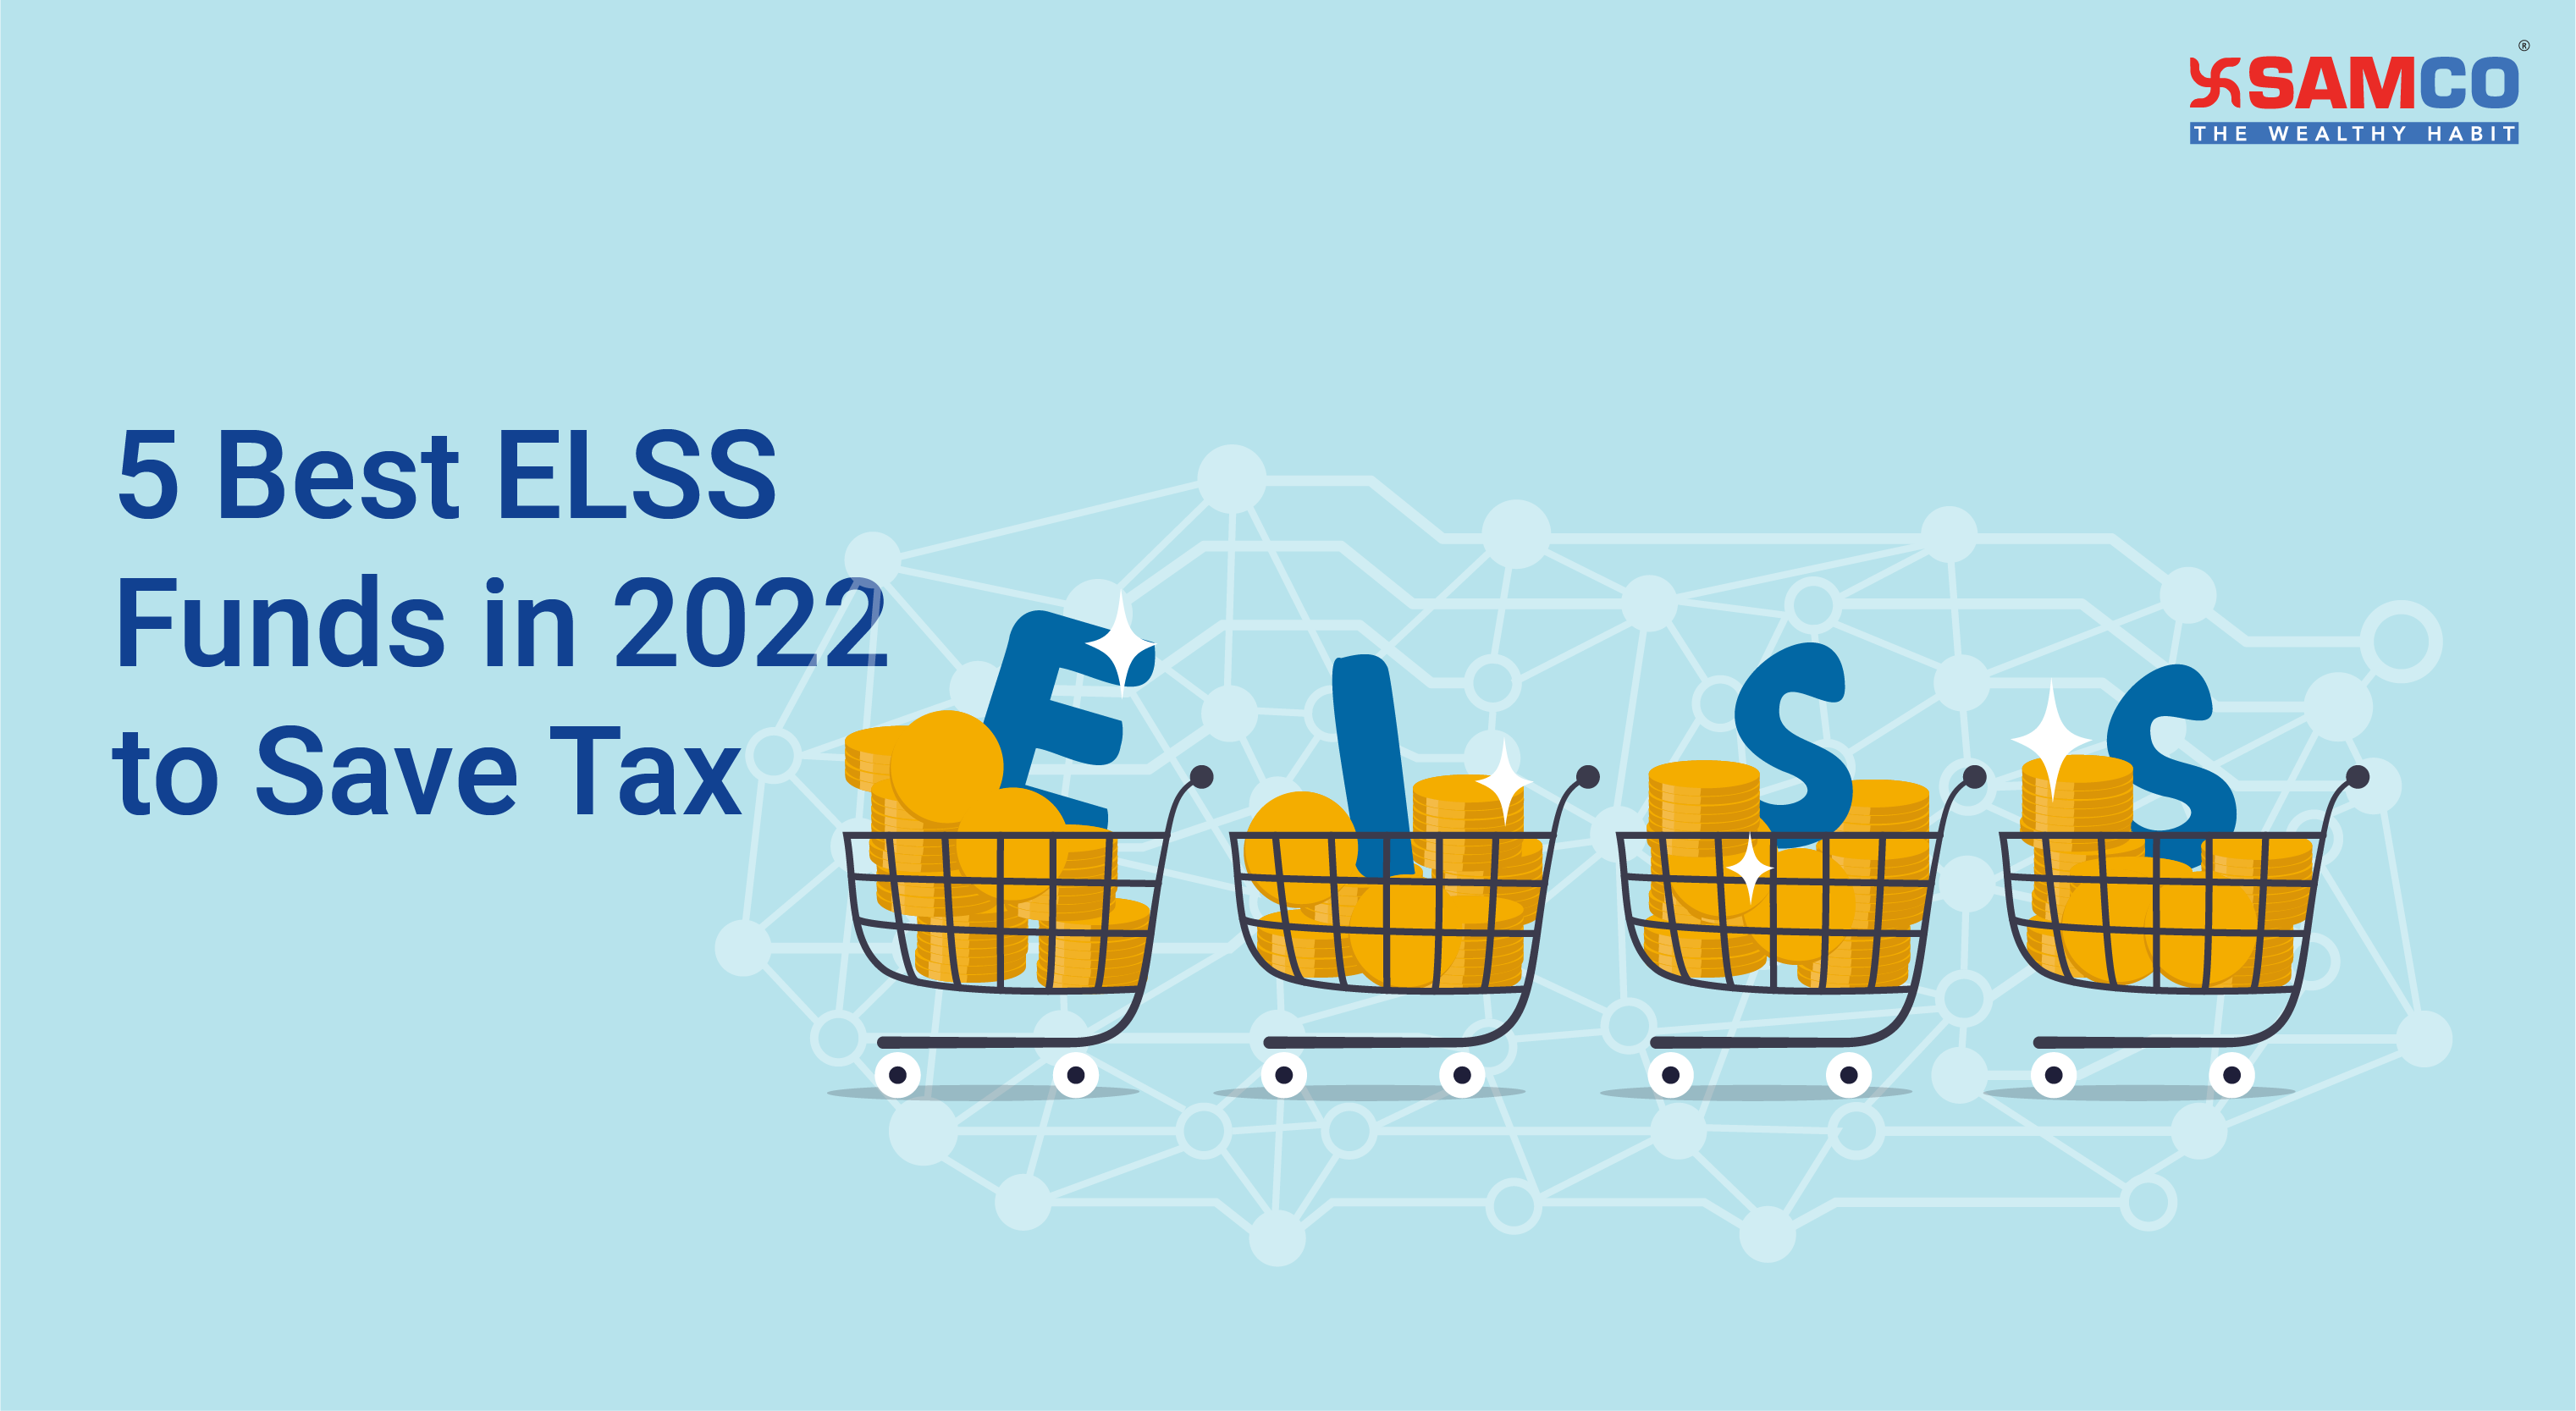 5 Best ELSS Funds in 2022 to Save Tax